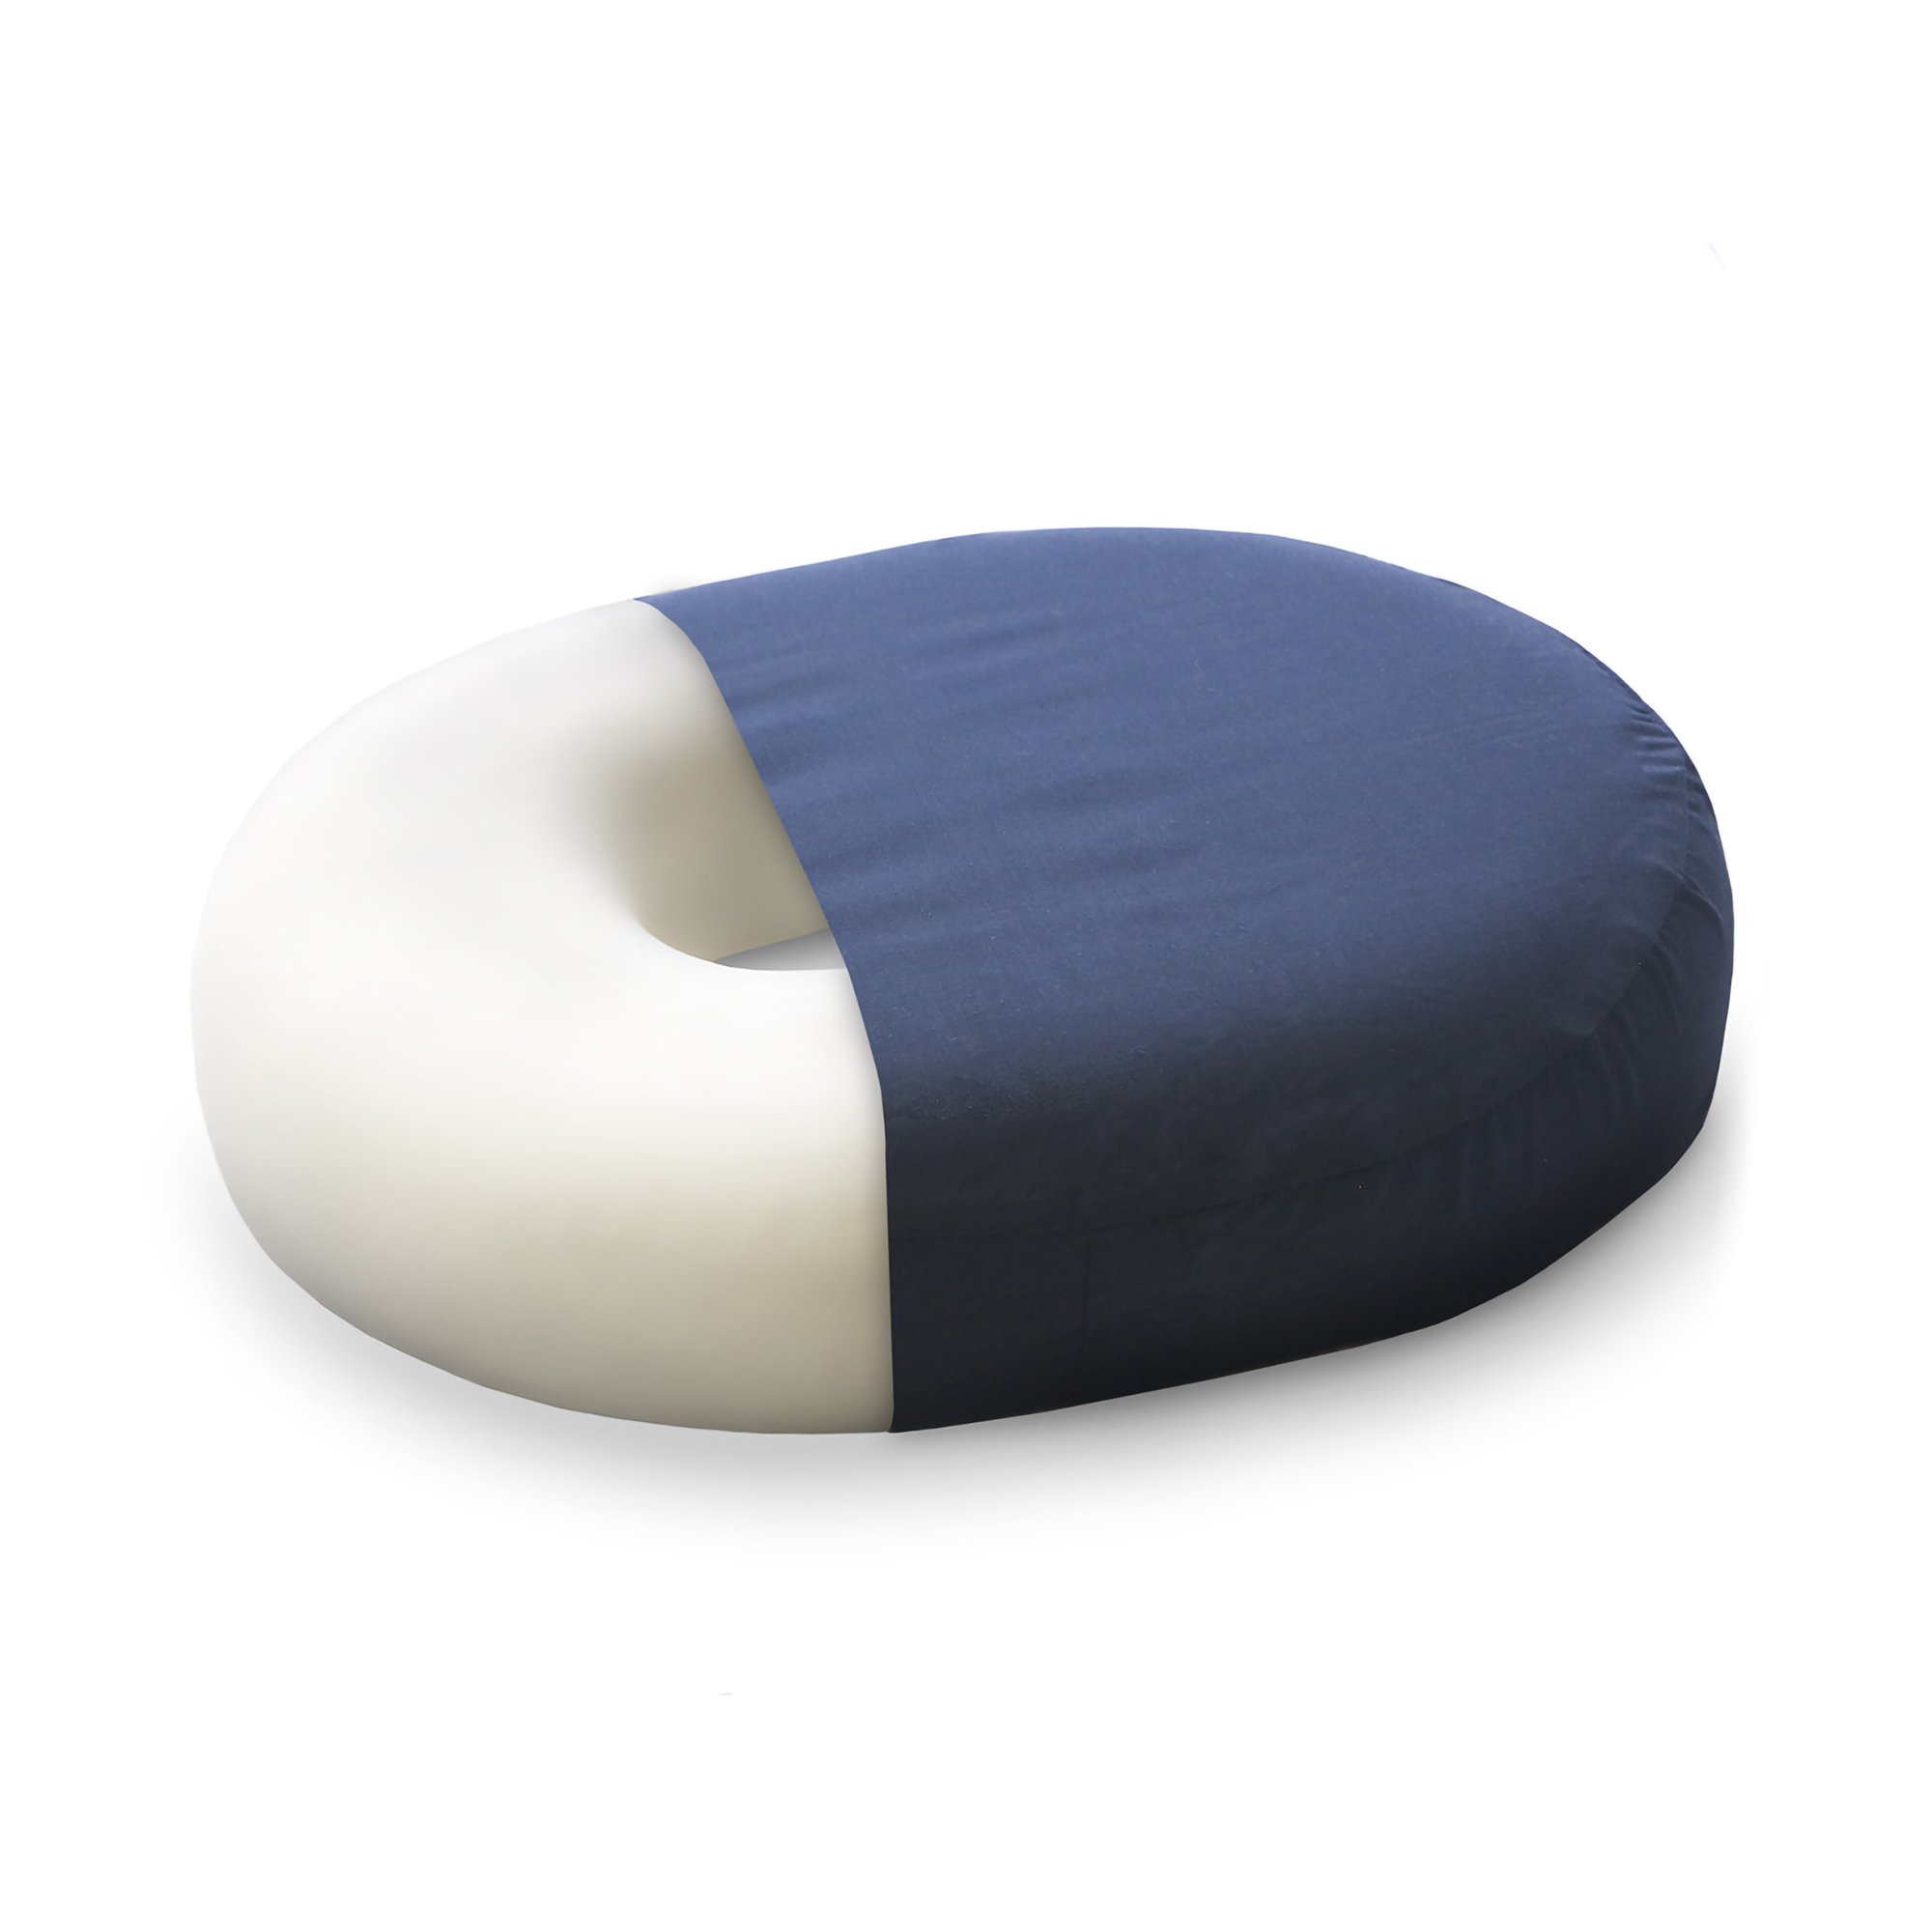 McKesson Donut Seat Cushion - Inflatable, Vinyl, White - 13 in x 13 in